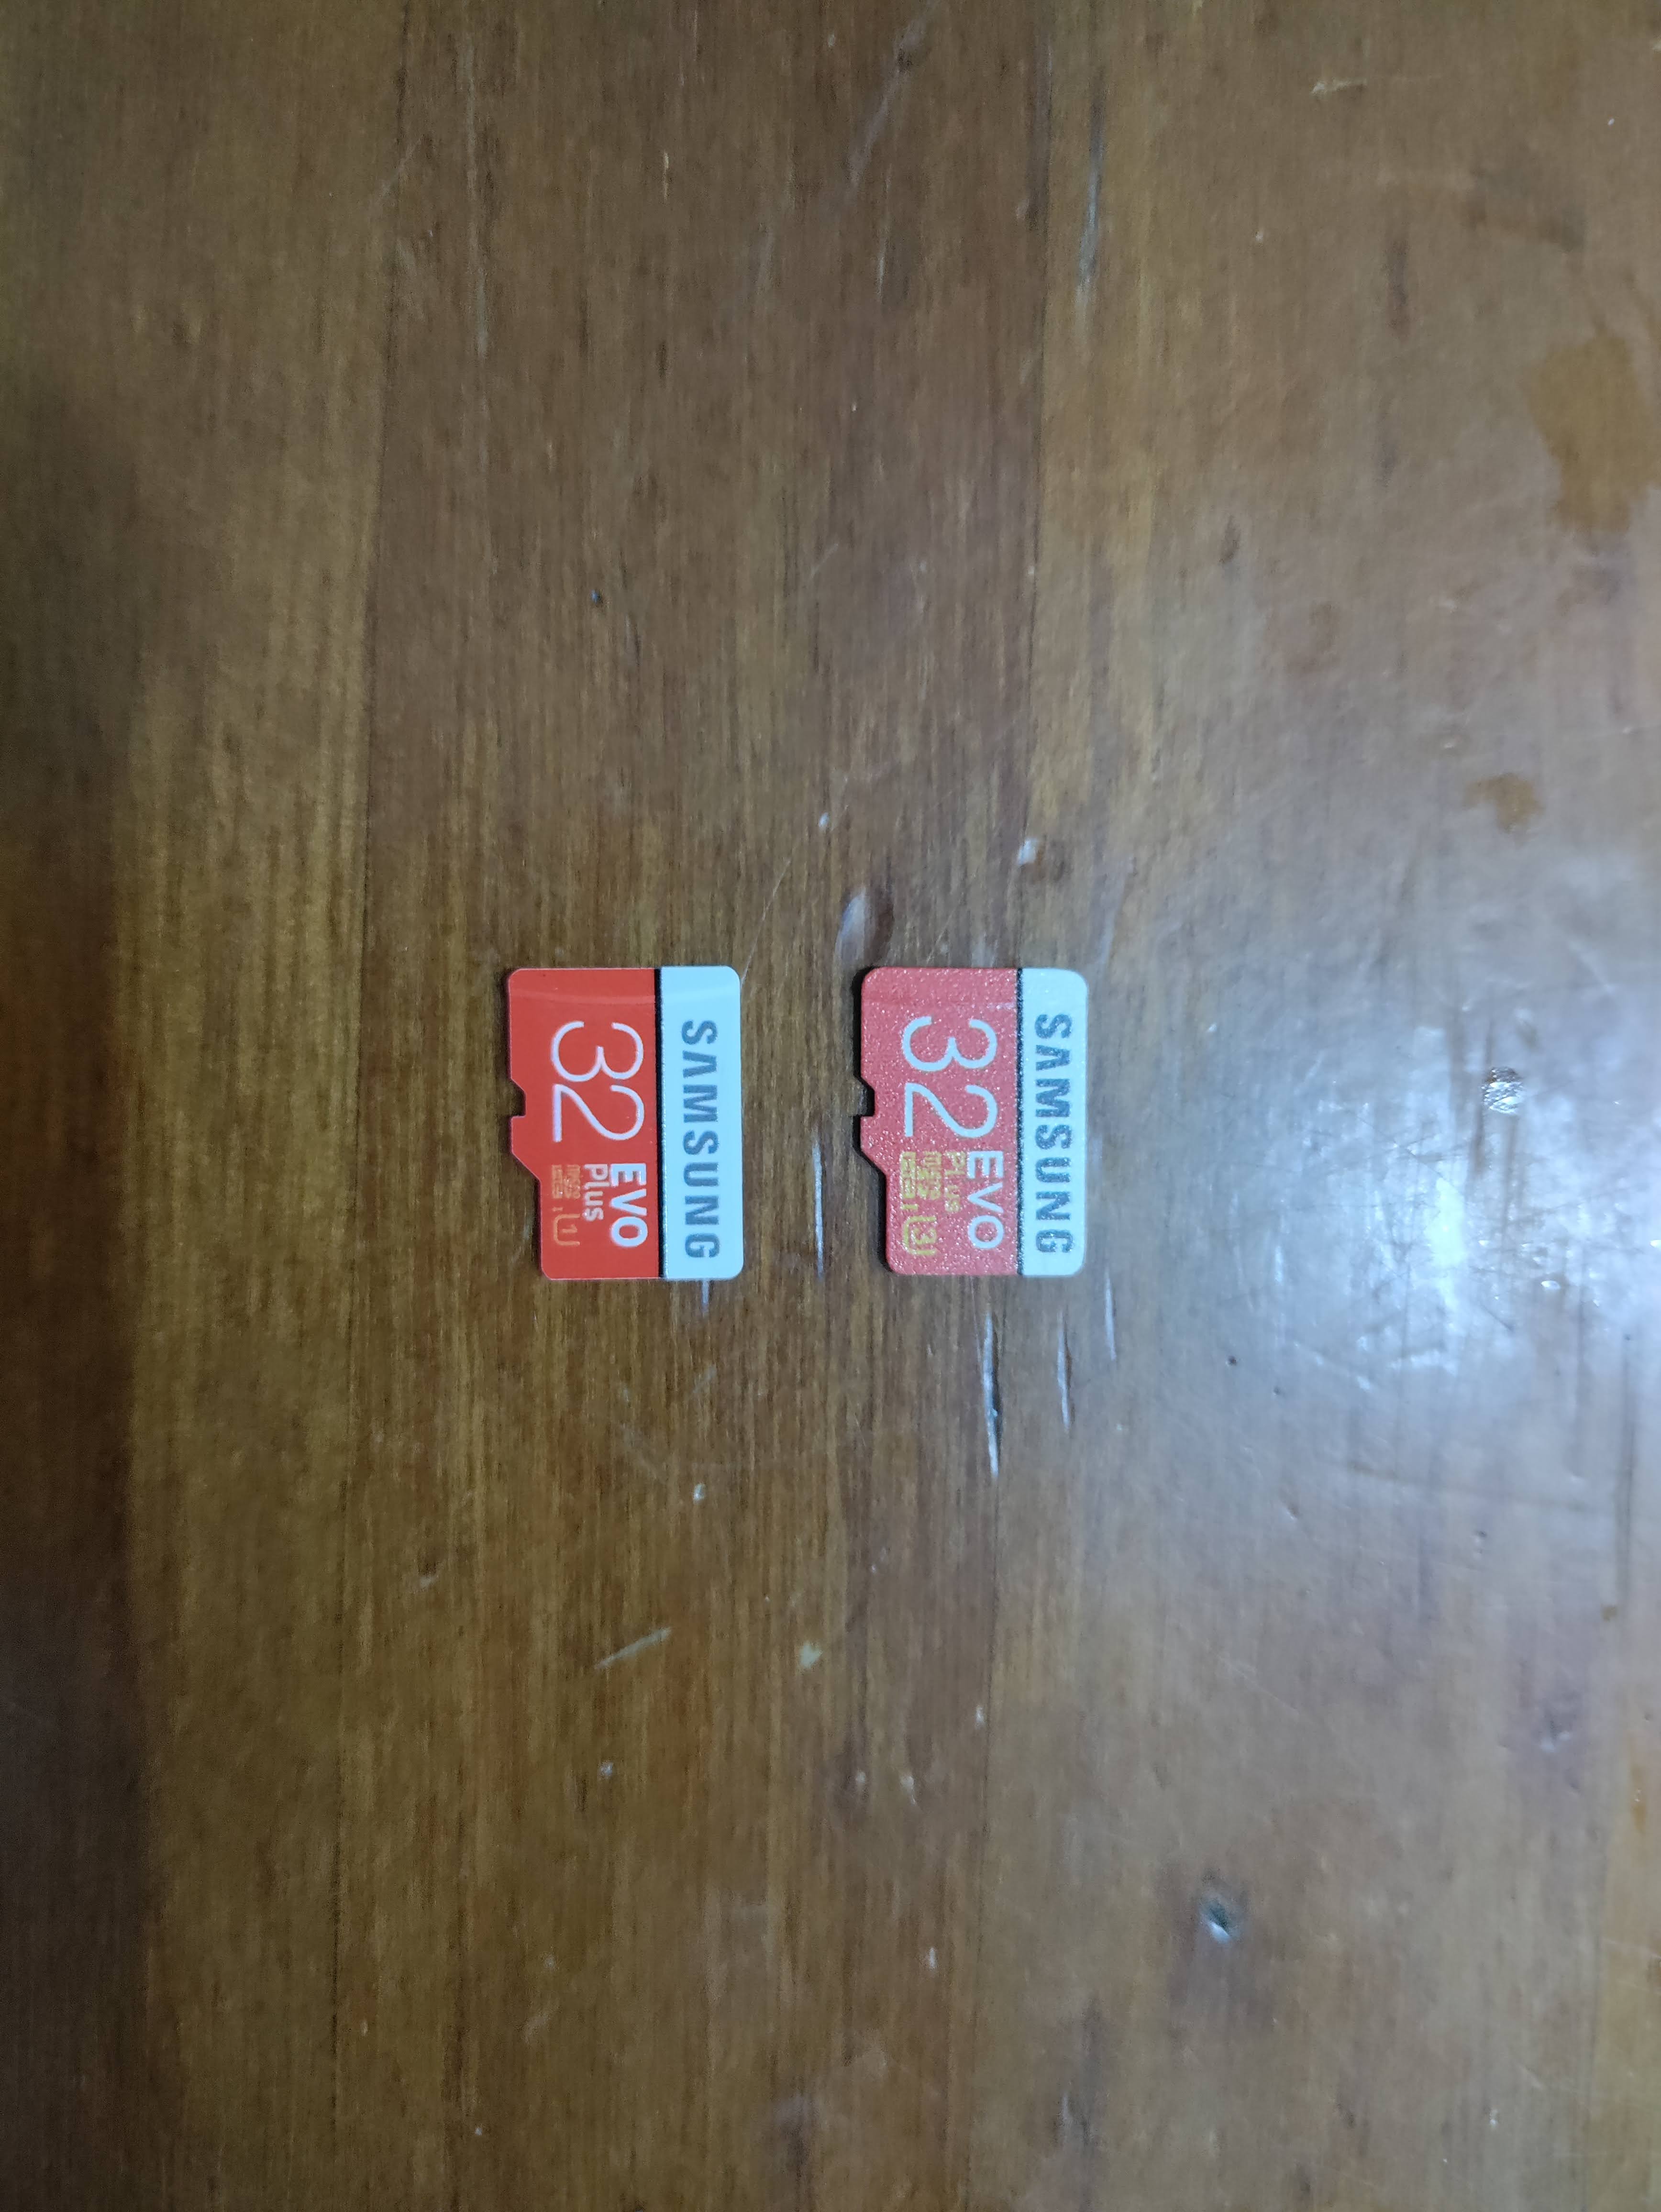 A genuine and fake micro-SD card; the real one is consistent in its text and has a more rougher surface than the fake one.